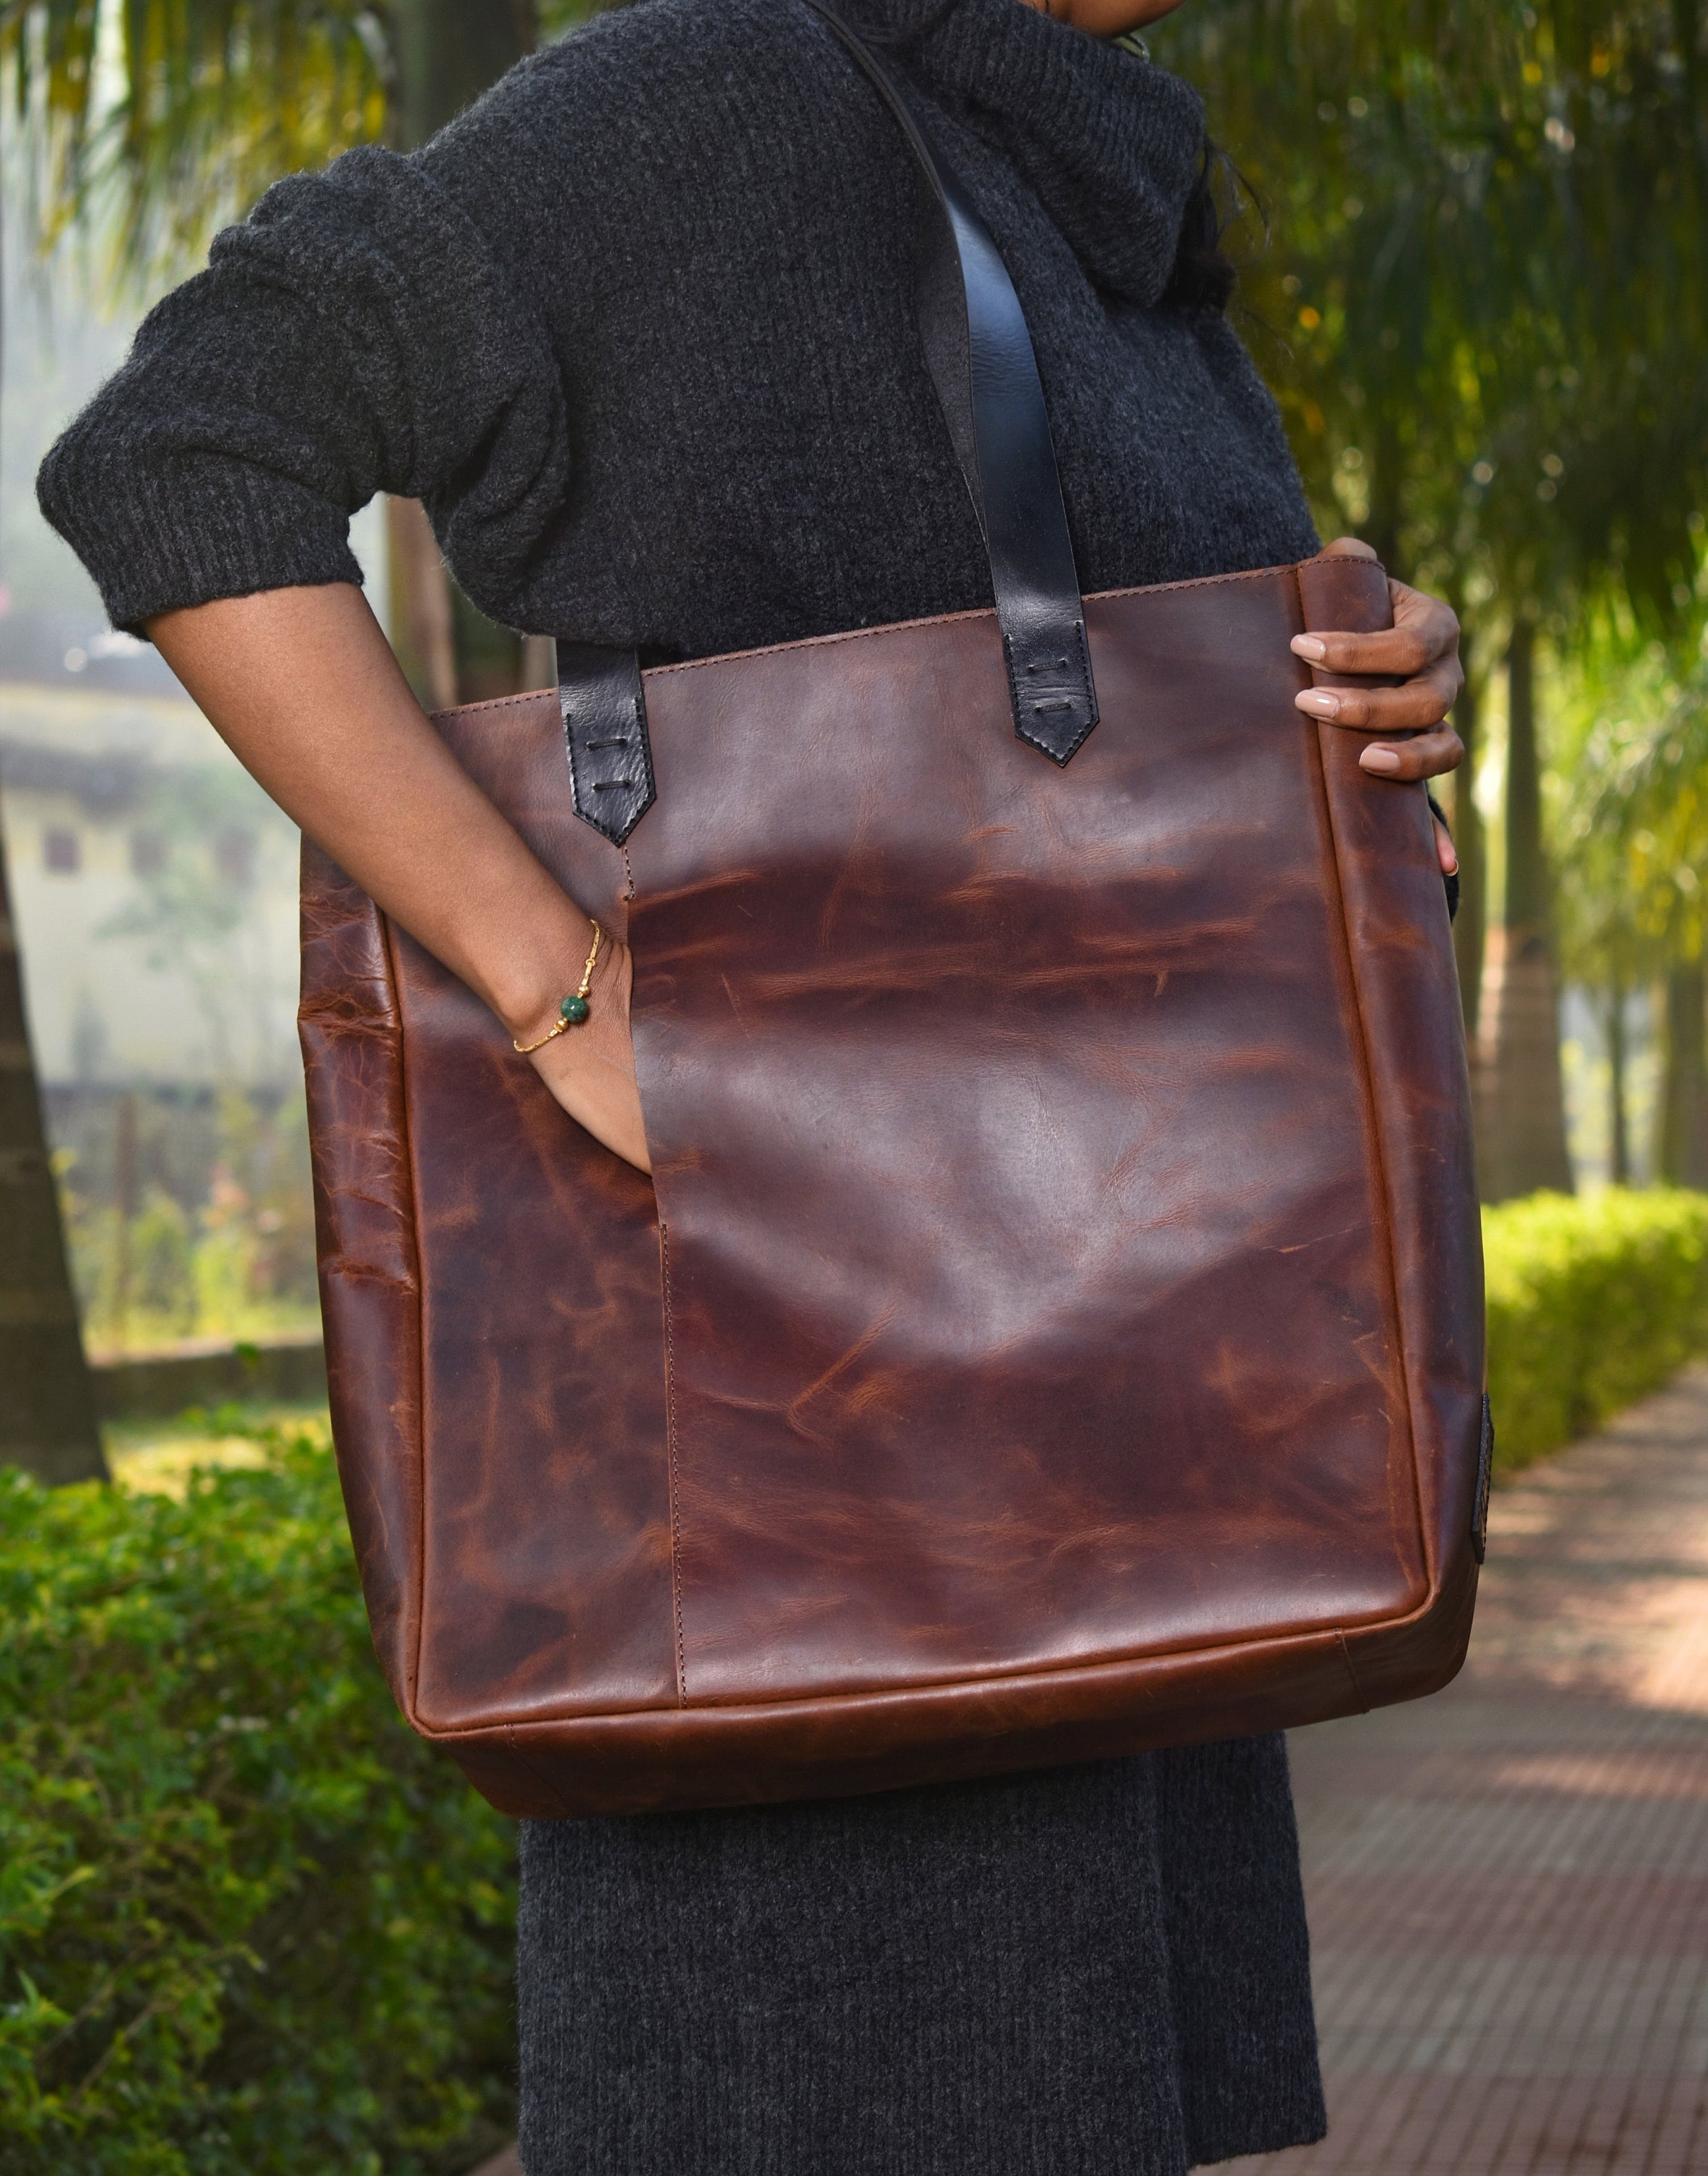 Buy Laptop Tote Bag Online In India  Etsy India